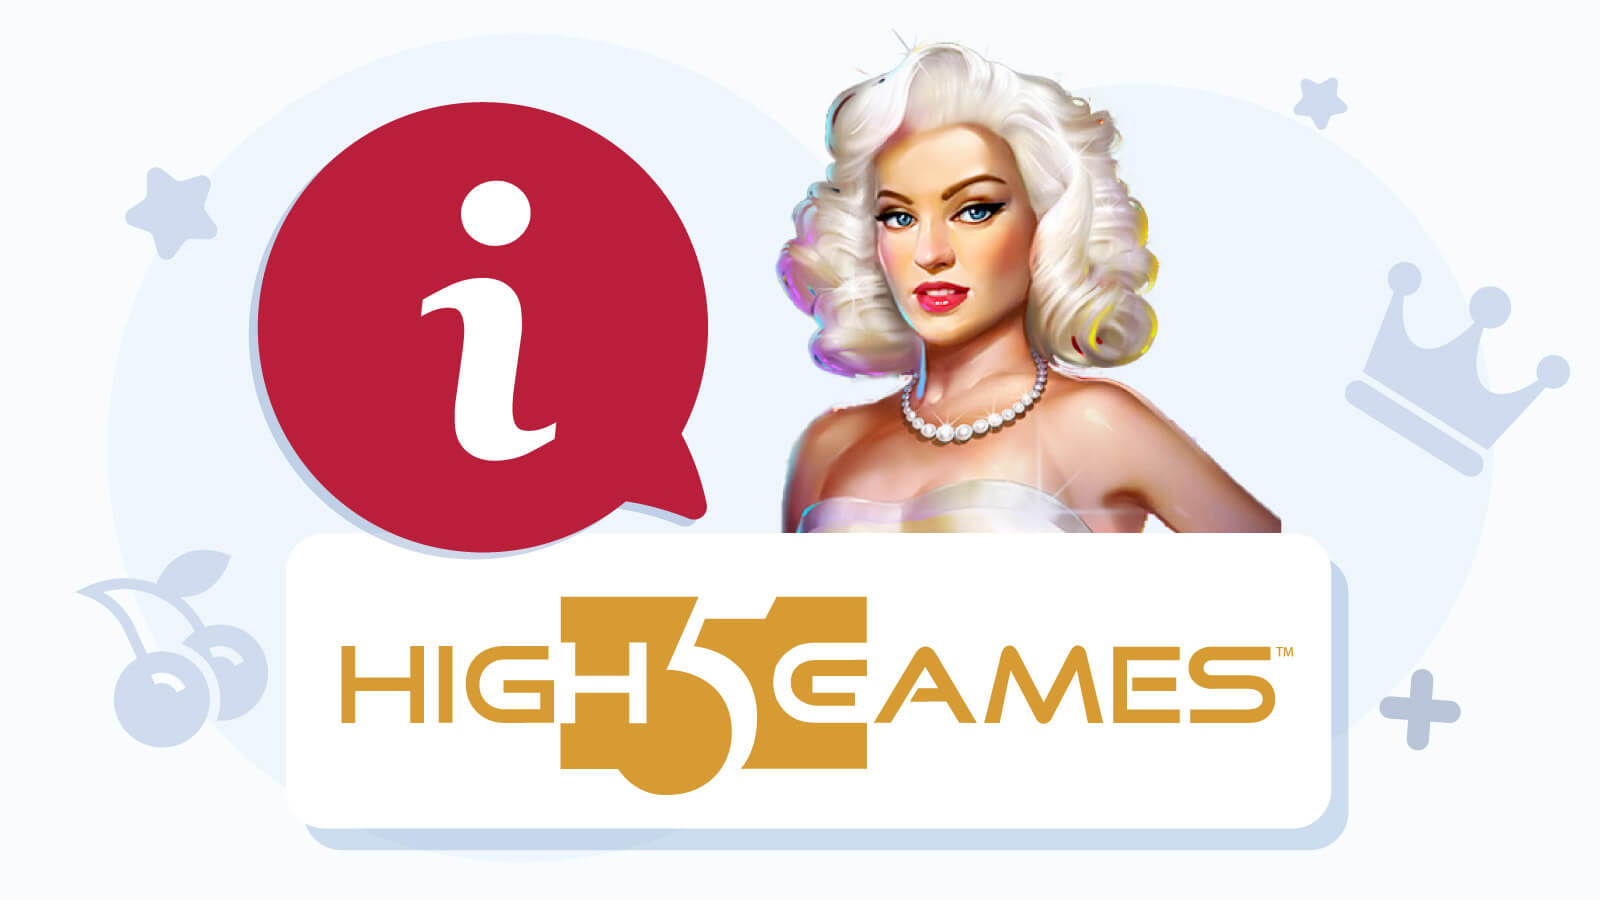 Quick High 5 Games Company Overview